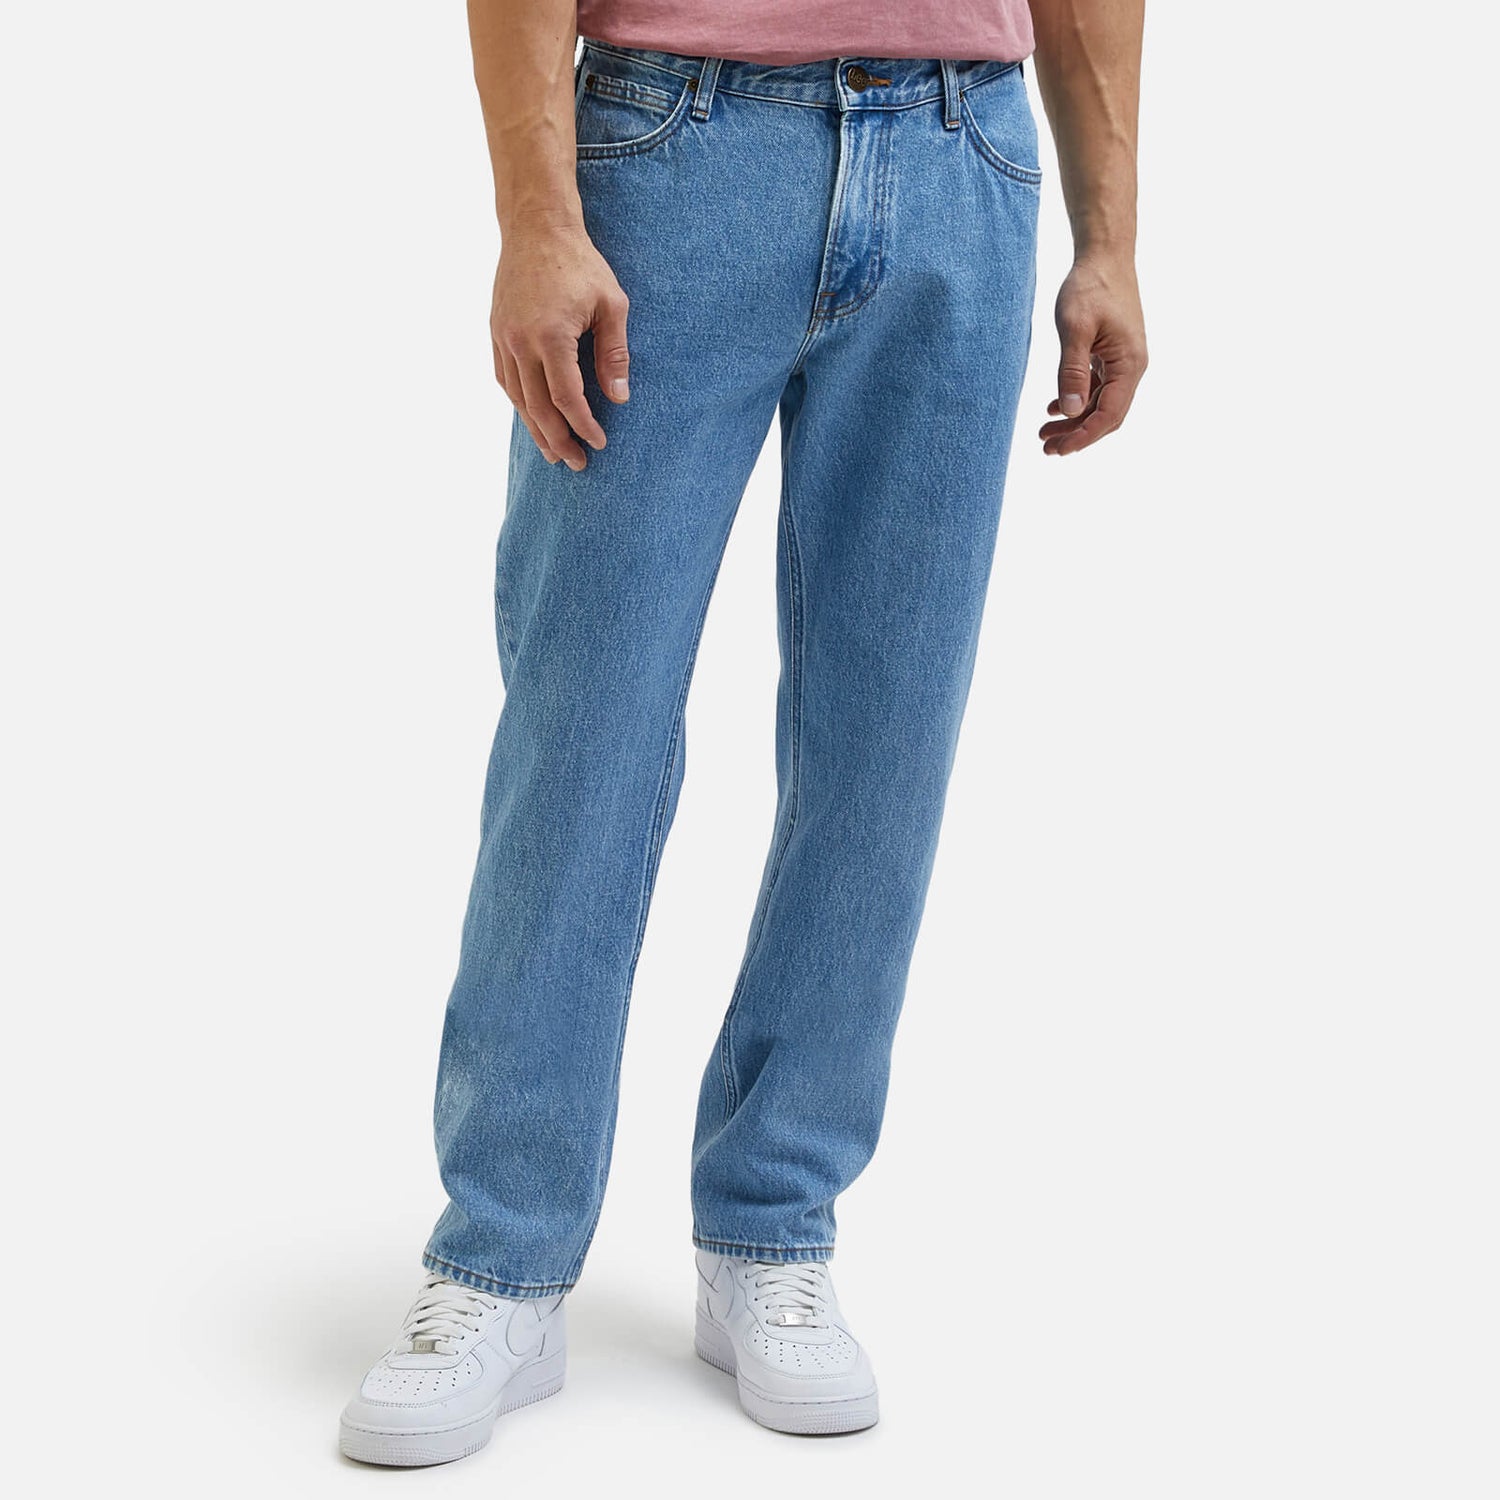 Lee West Denim Relaxed Jeans - W30/L30